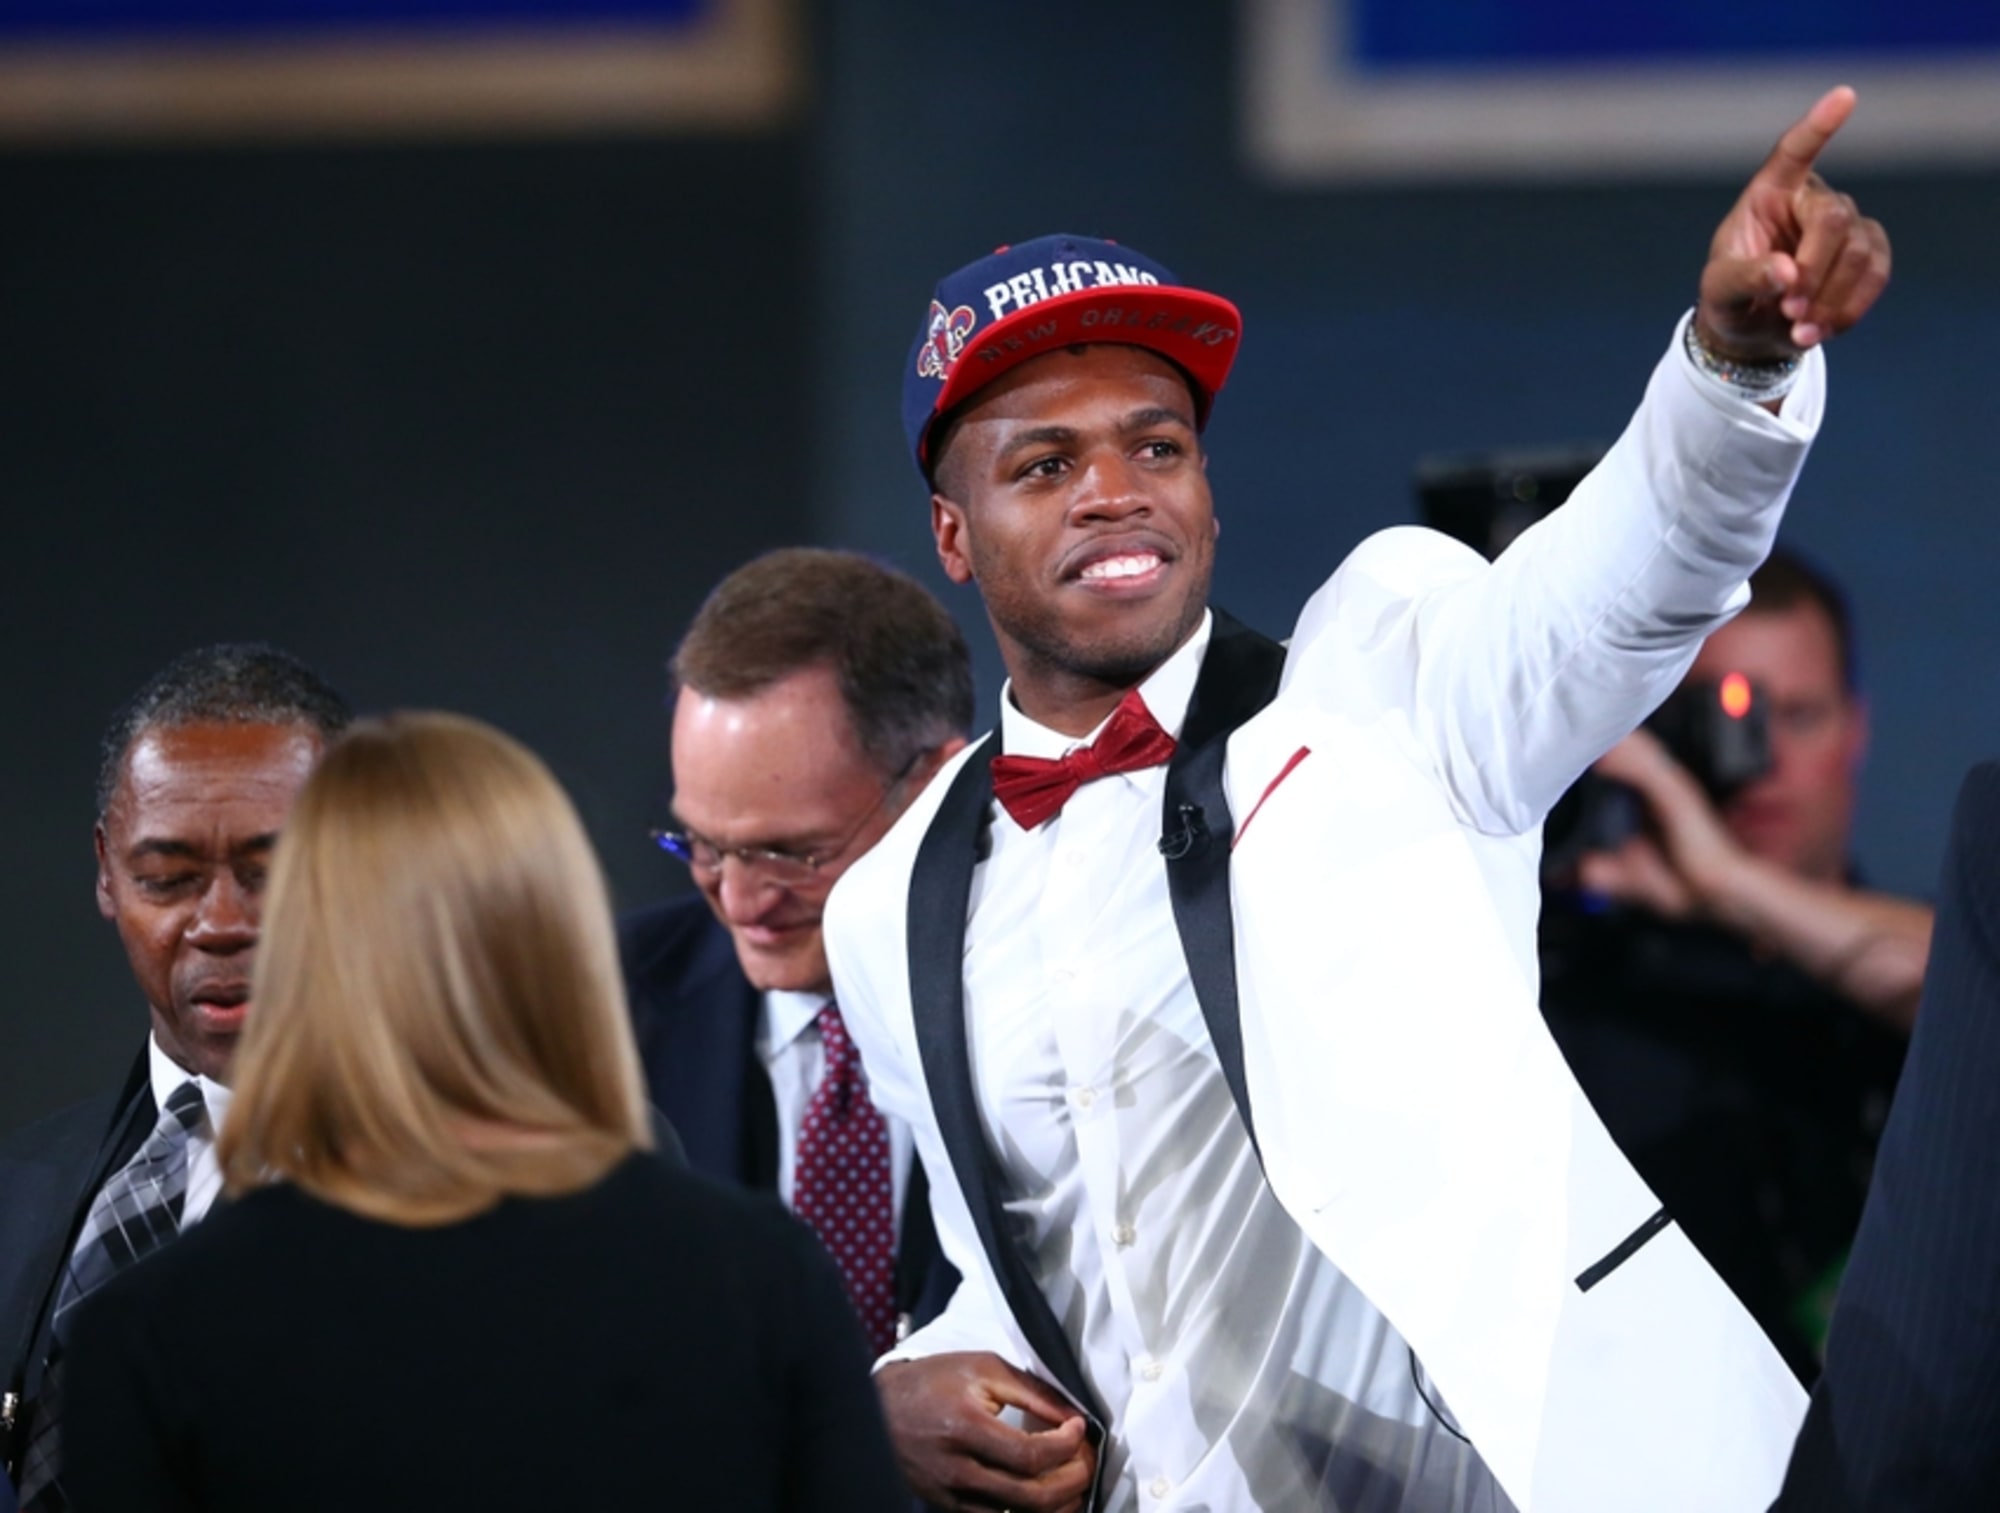 Pelicans choose Hield with 6th overall pick in NBA draft